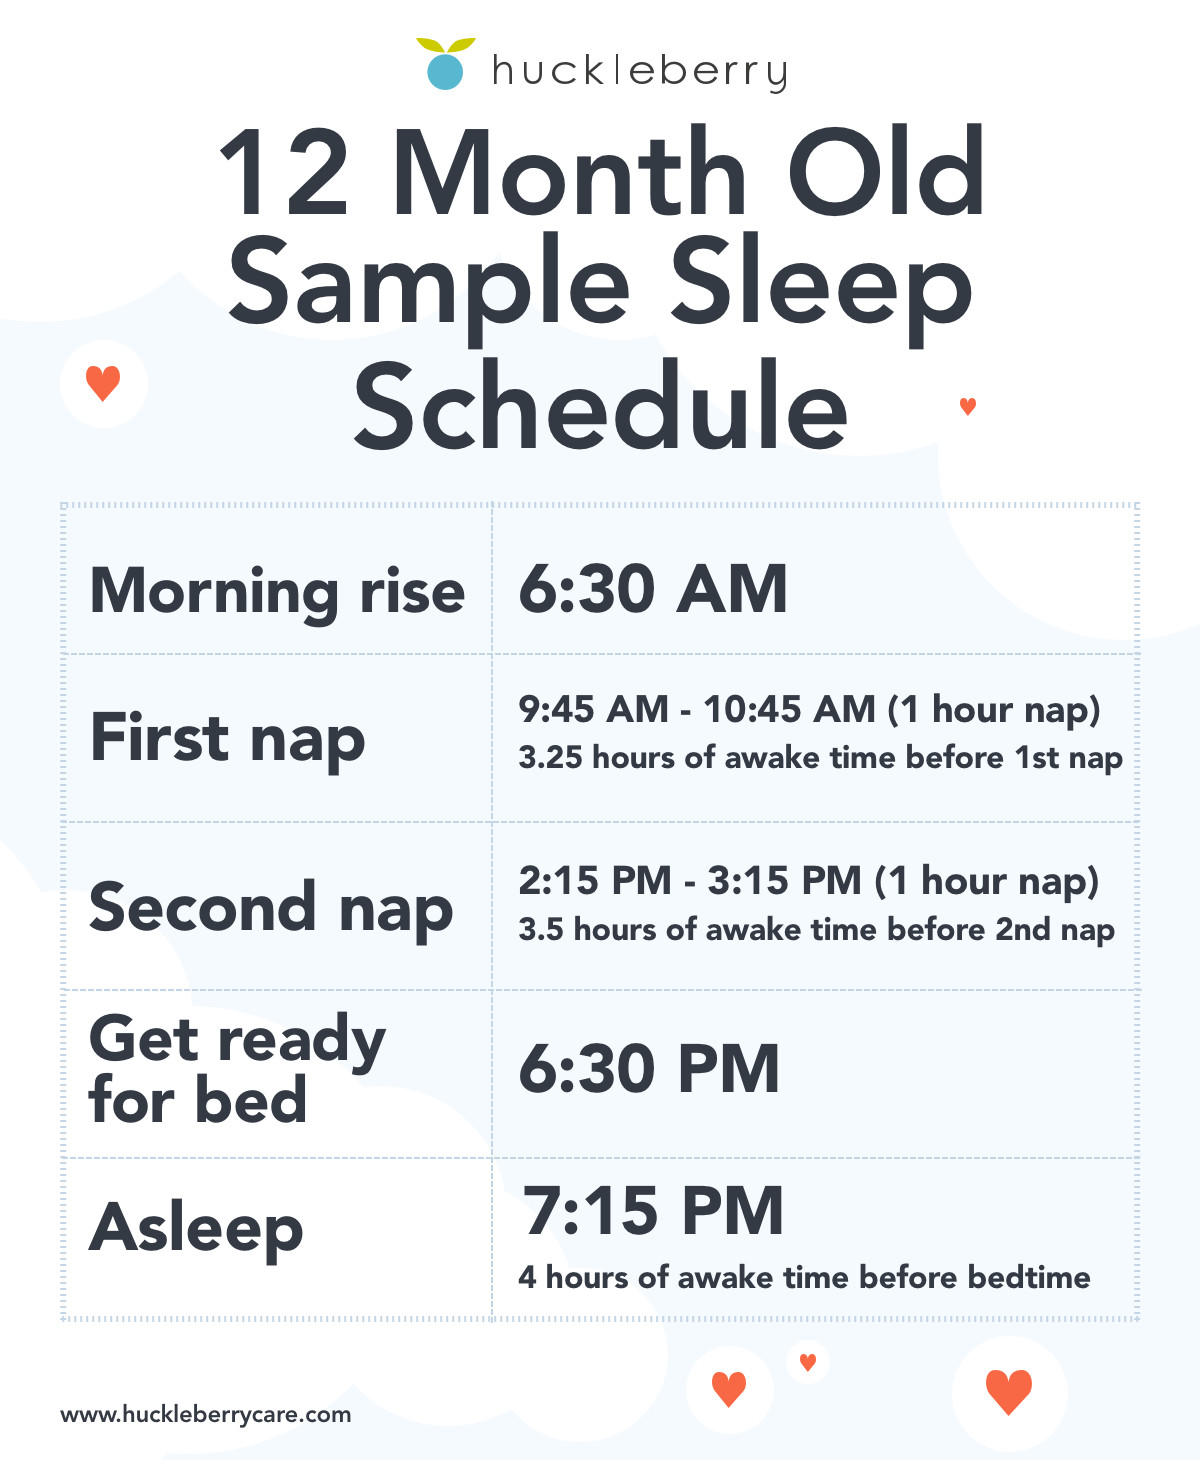 12 month / 1 year old sleep schedule: Bedtime and nap schedule